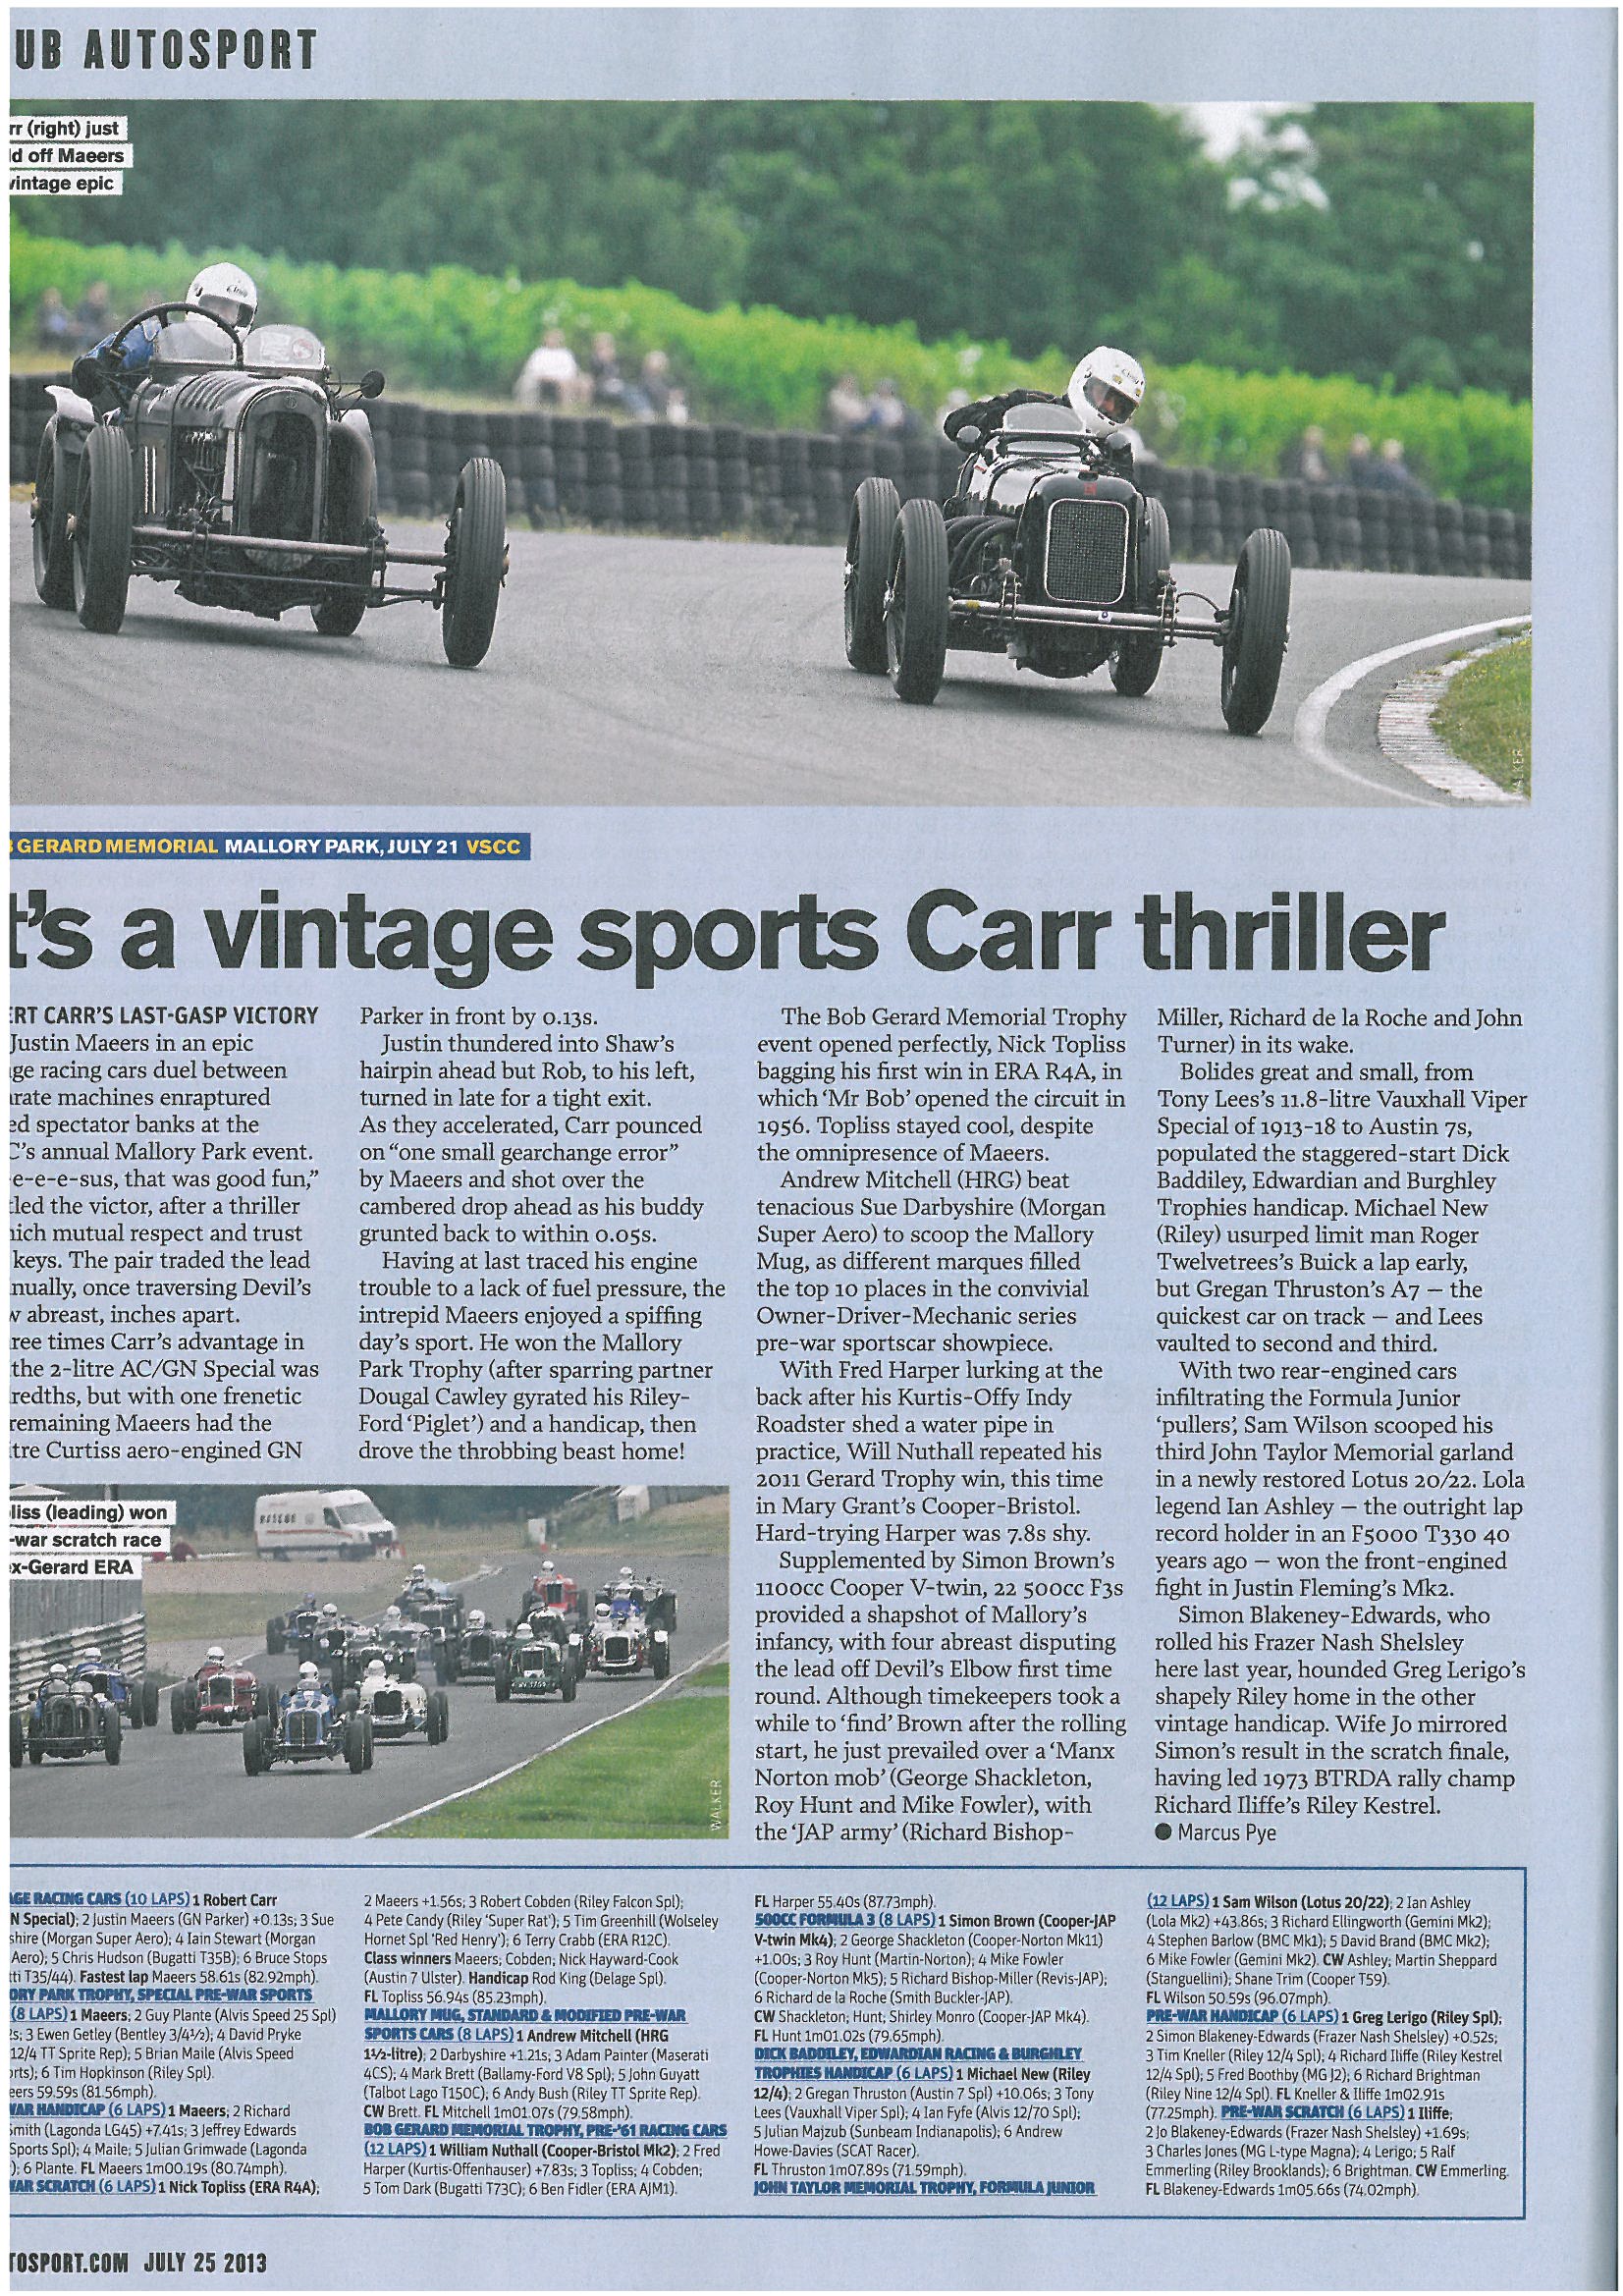 Today’s Autosport features VSCC Mallory Park Report cover